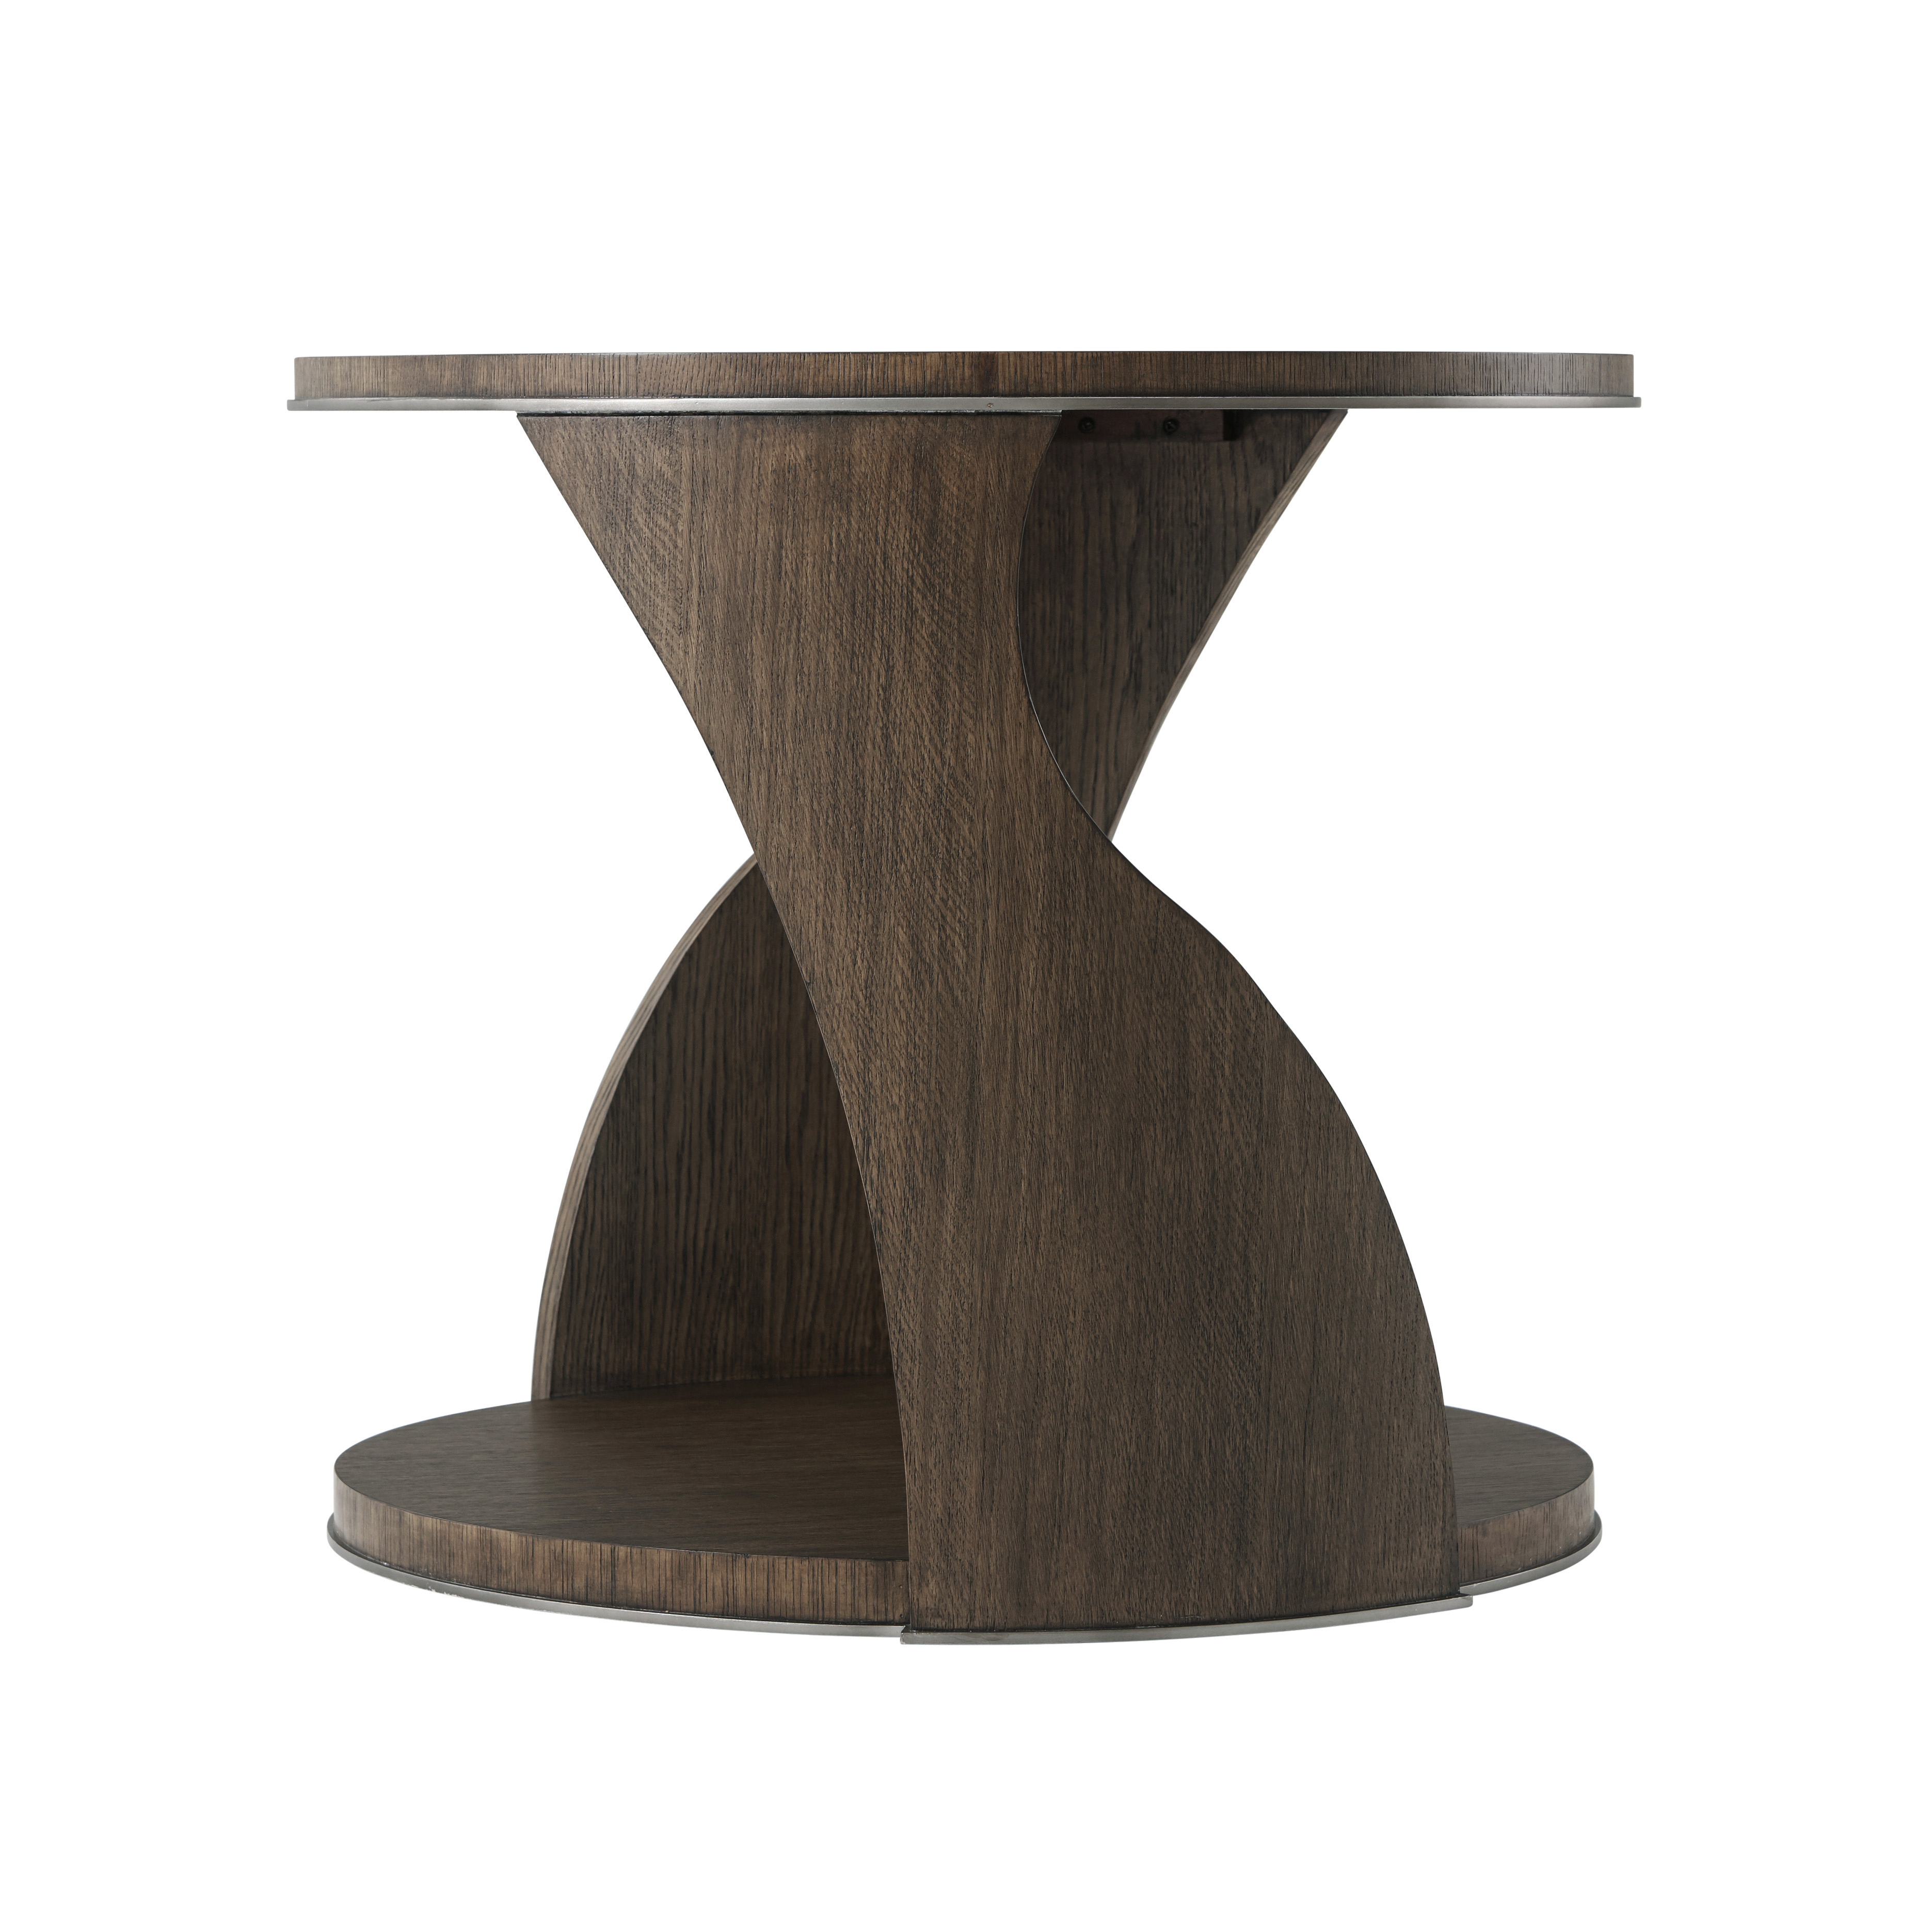 ADELMO SIDE TABLE